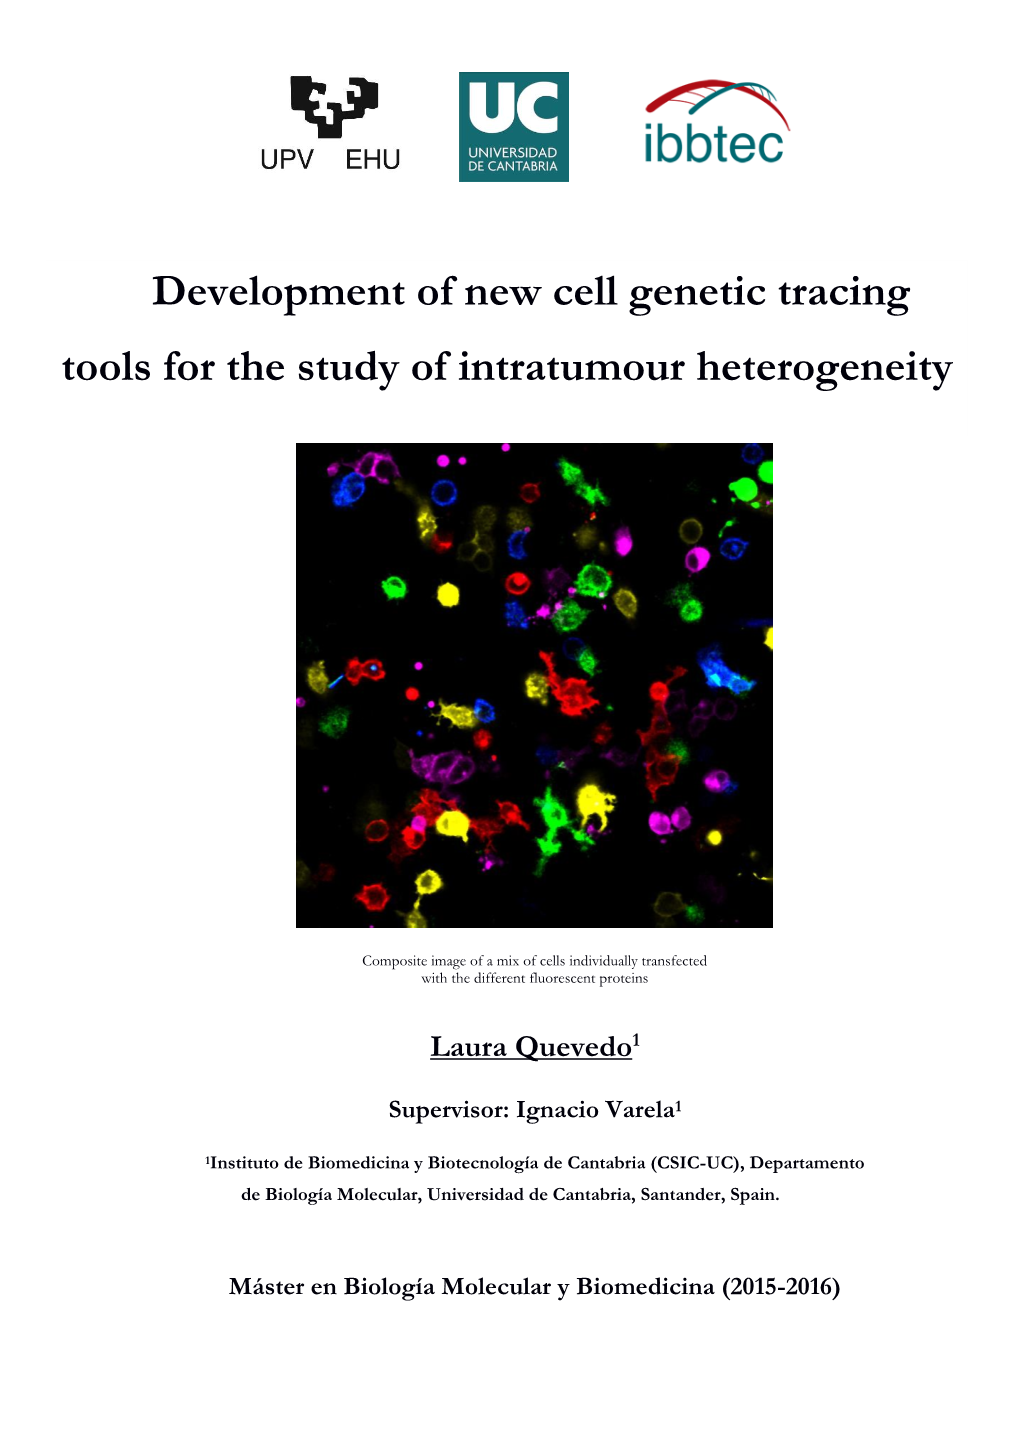 Development of New Cell Genetic Tracing Tools for the Study of Intratumour Heterogeneity